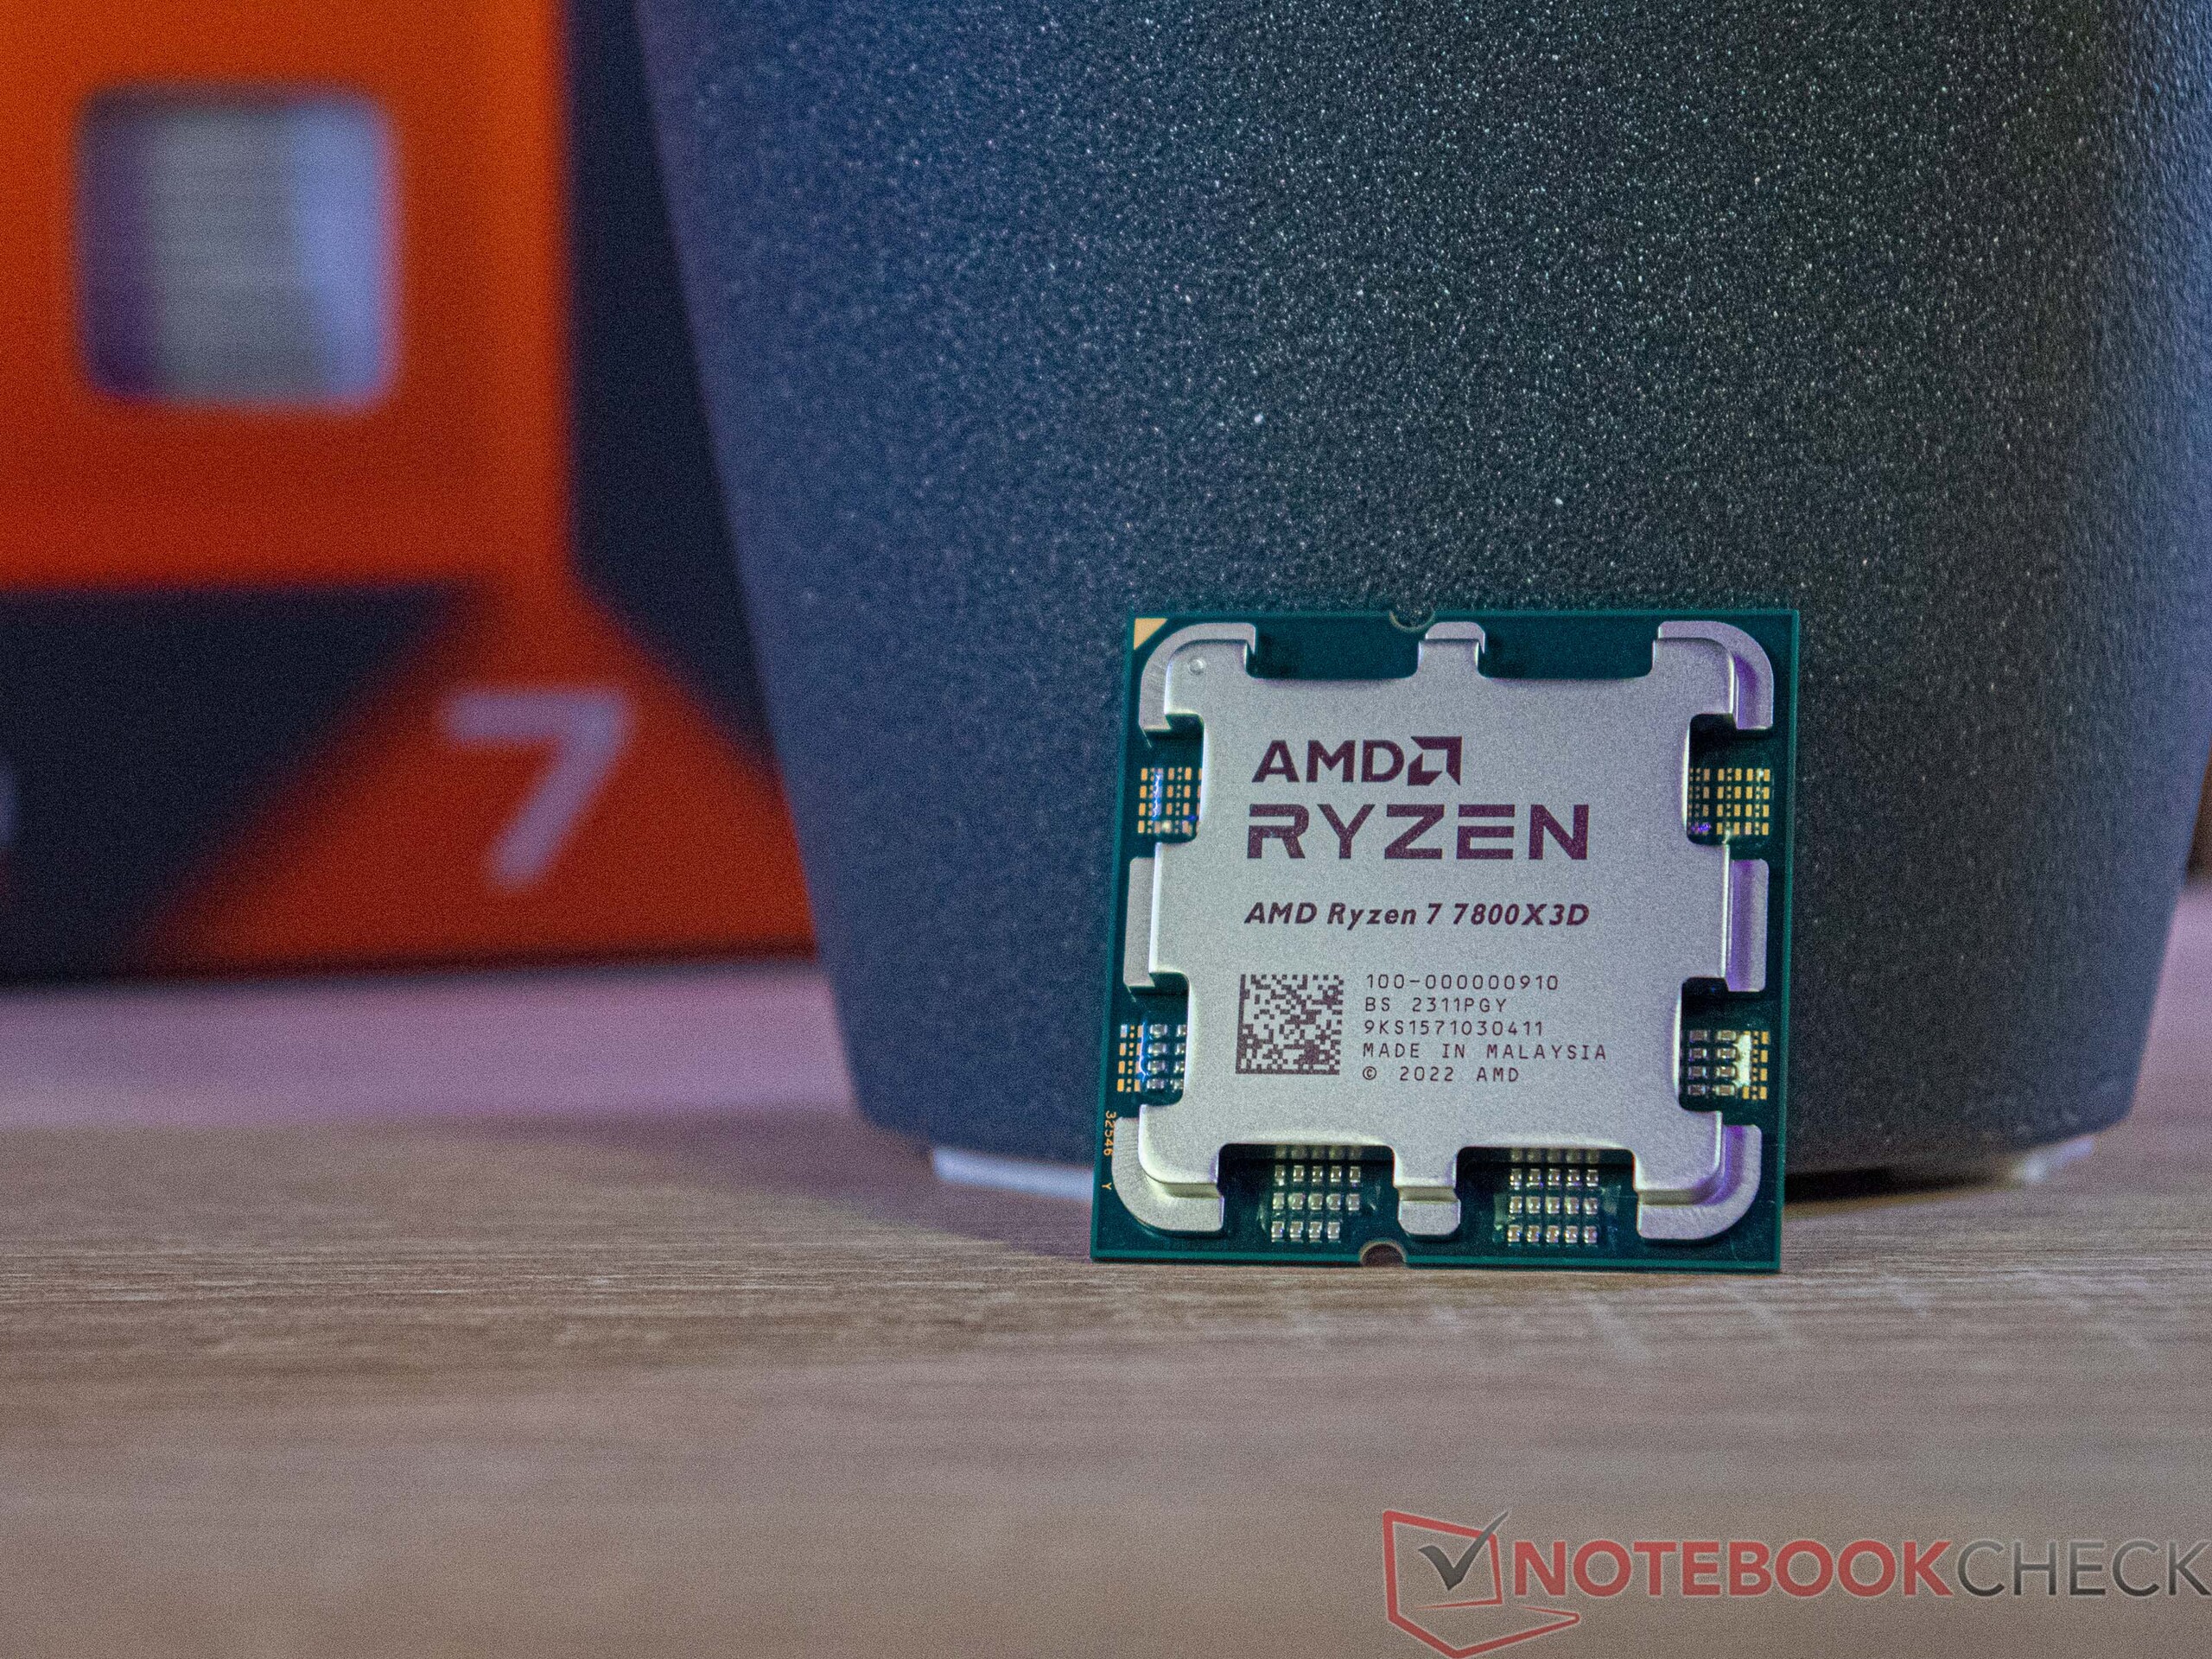 AMD Ryzen 9 5950X hits lowest price ever and comes with Uncharted